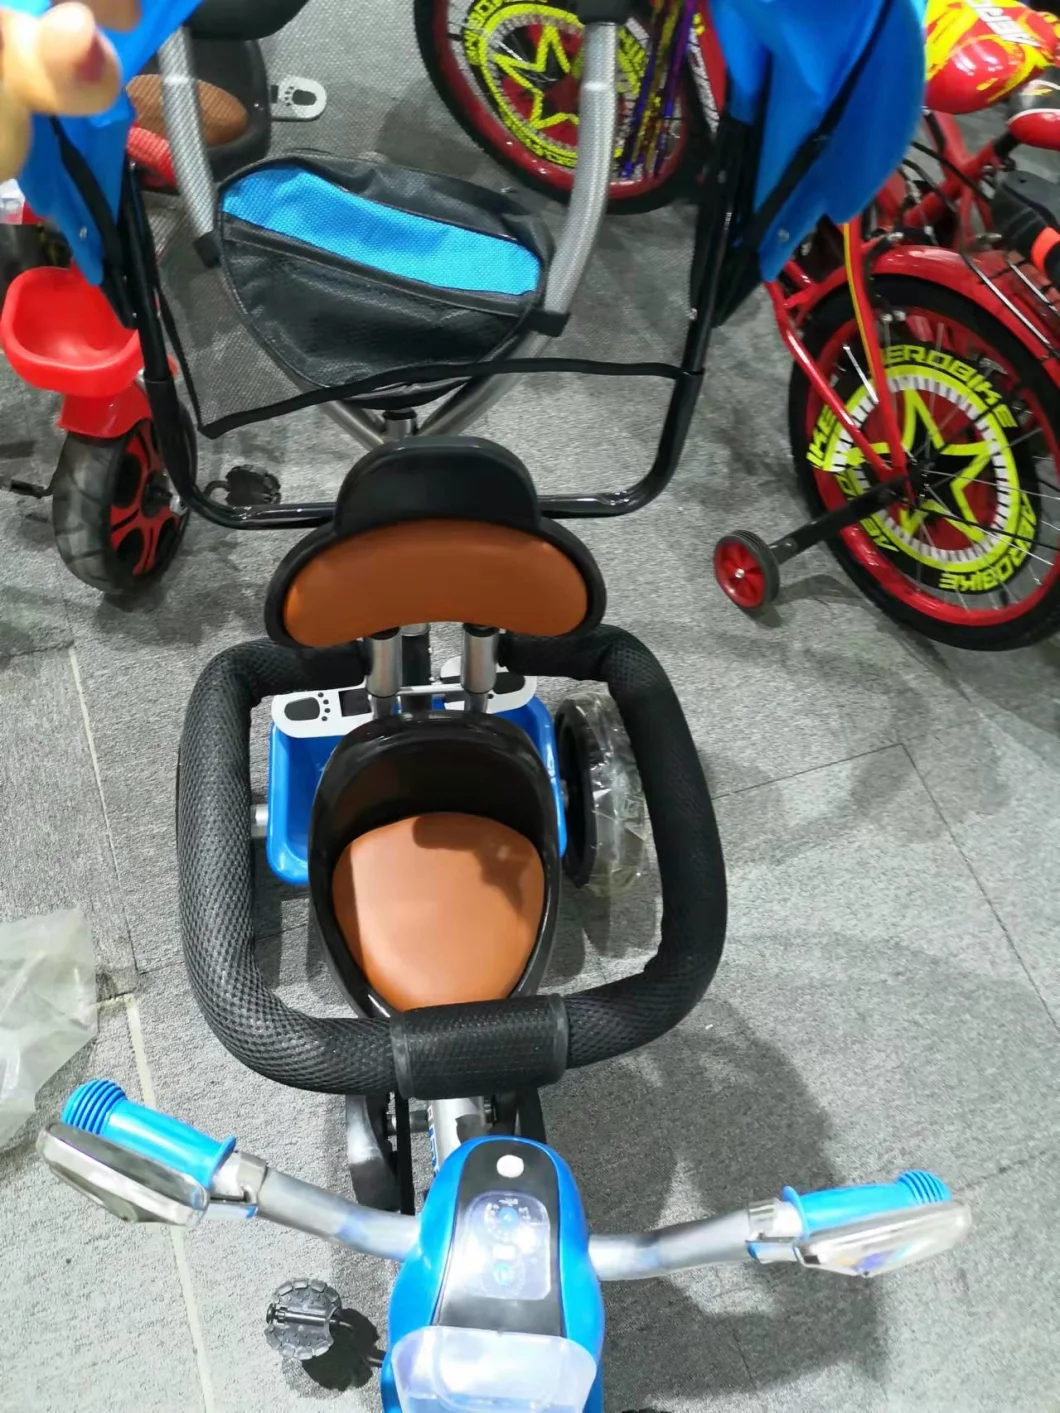 Super Quality Tricycle for Kids